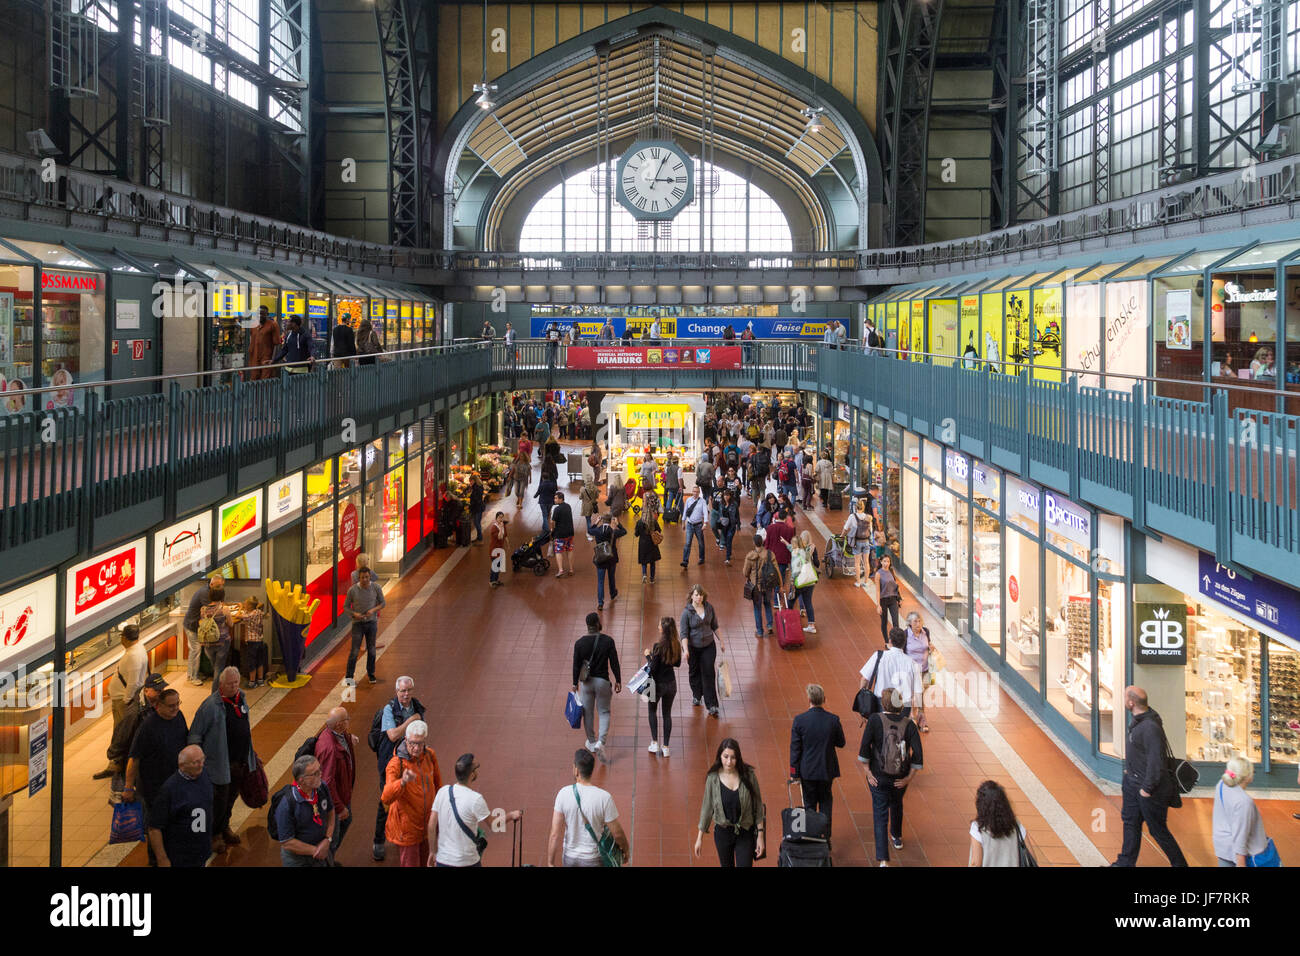 August, 05, 2016: People and shops in the main train station Stock Photo